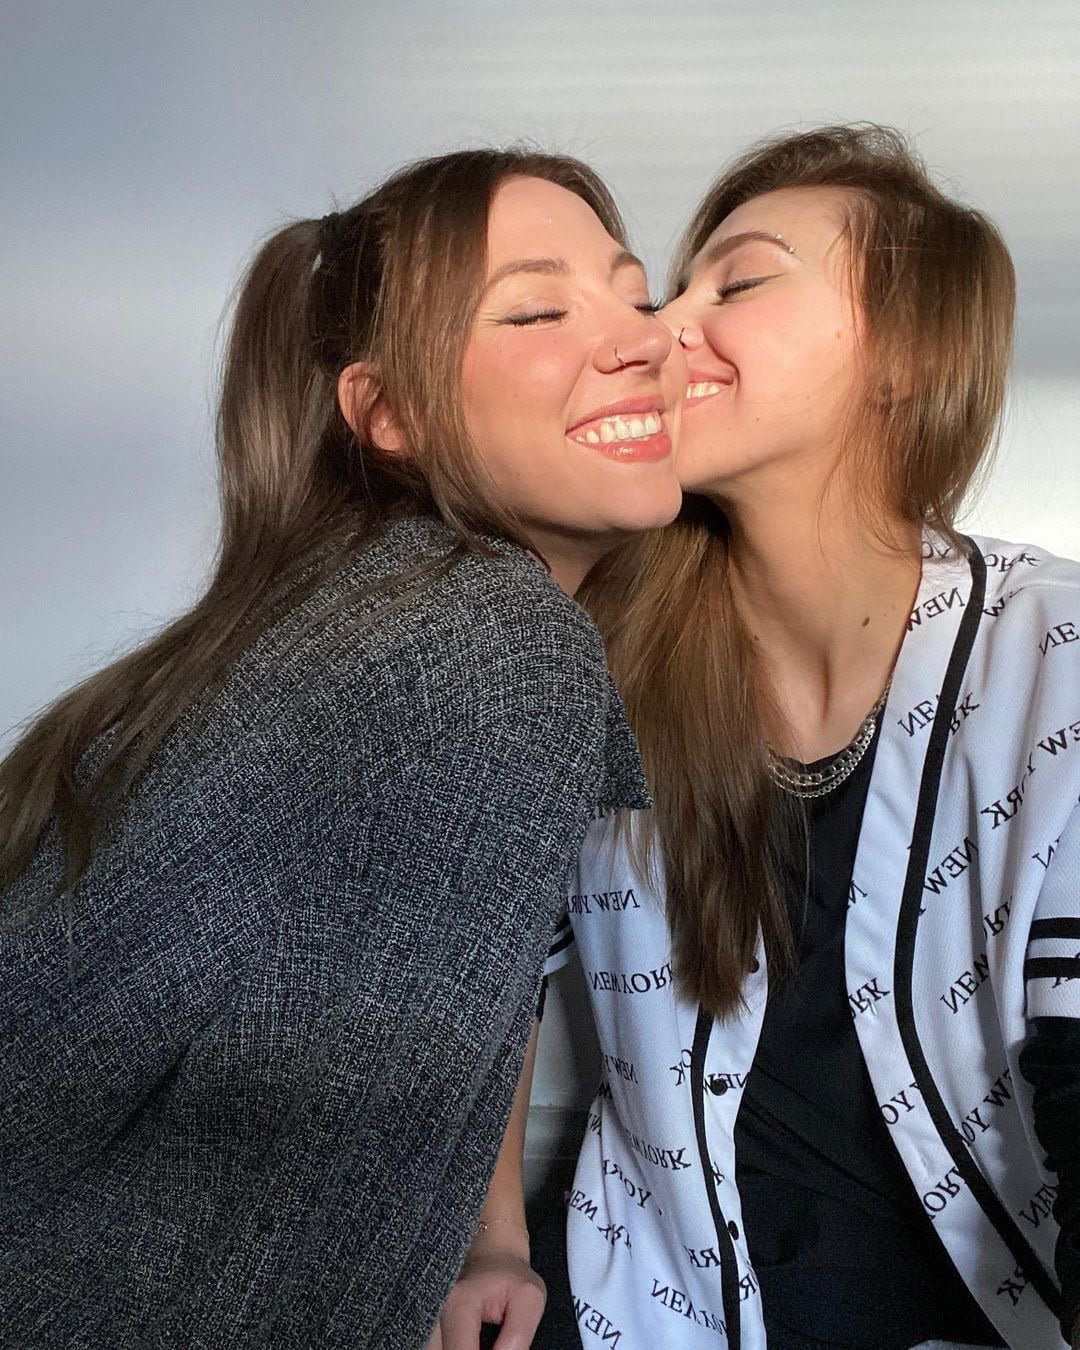 Potential Half-Sisters Won’t Pause Their Relationship